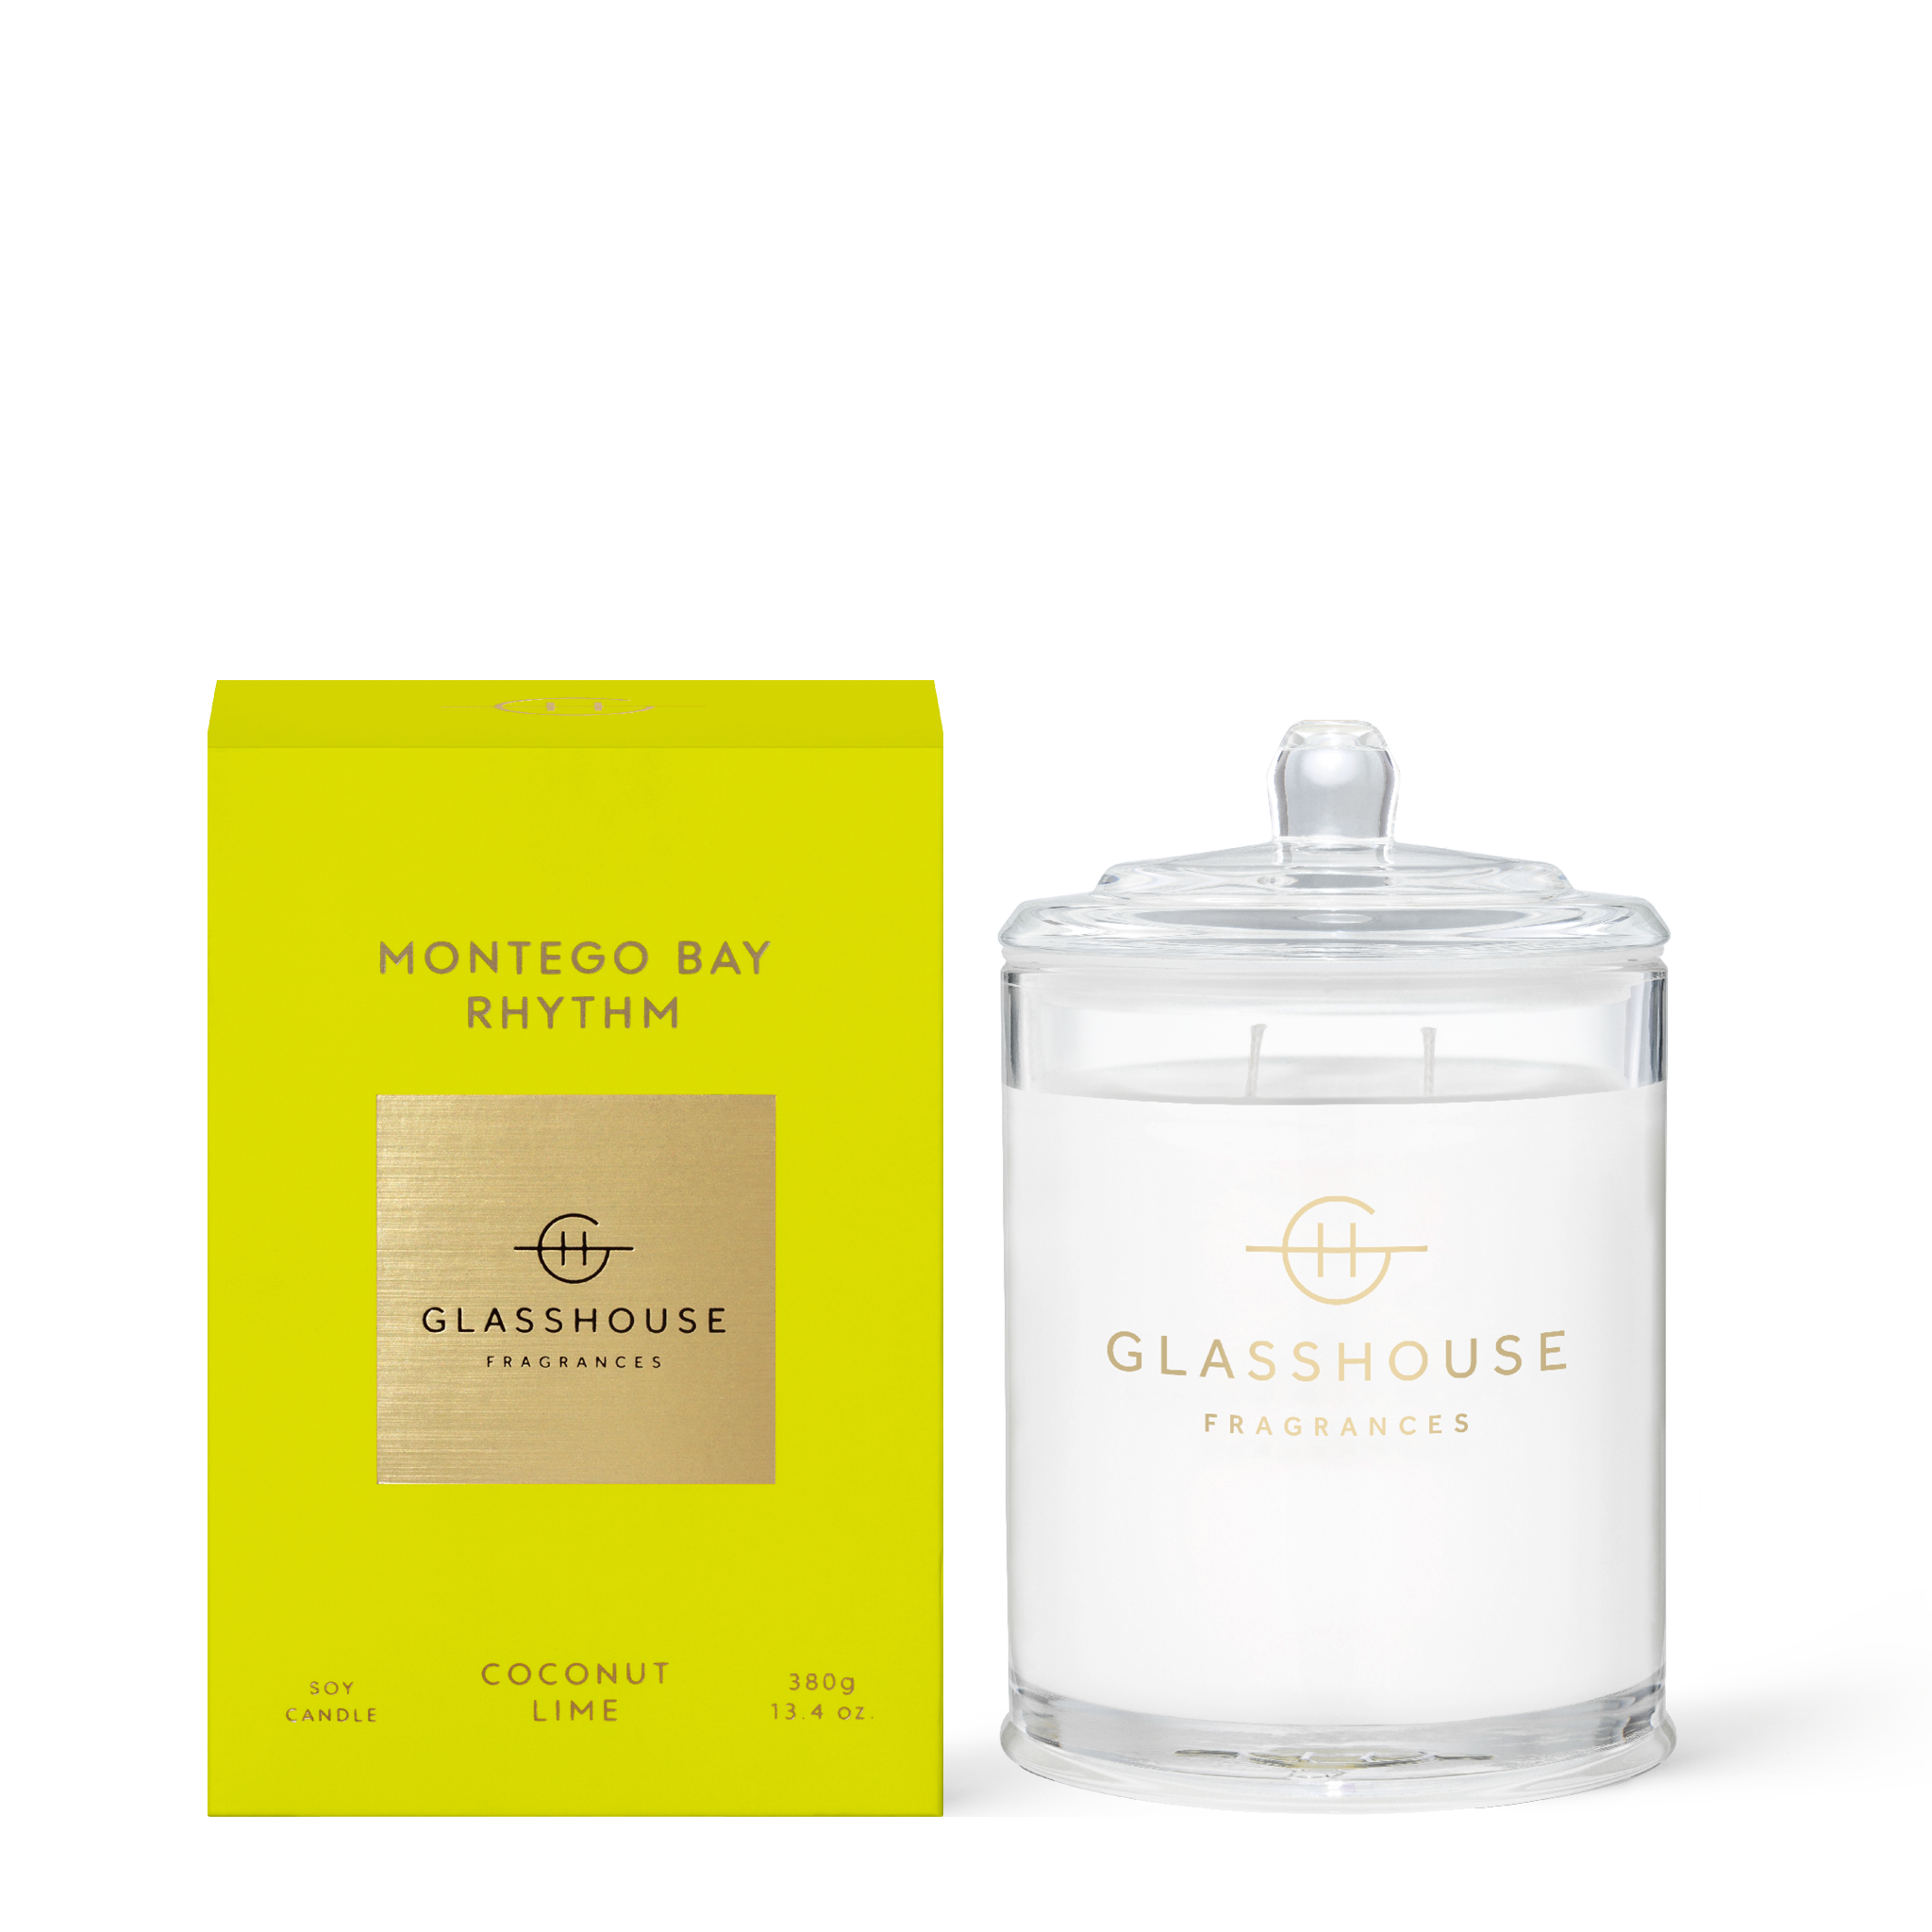 Glasshouse Fragrances Montego Bay Rhythm Coconut and Lime 380g Soy Candle with box